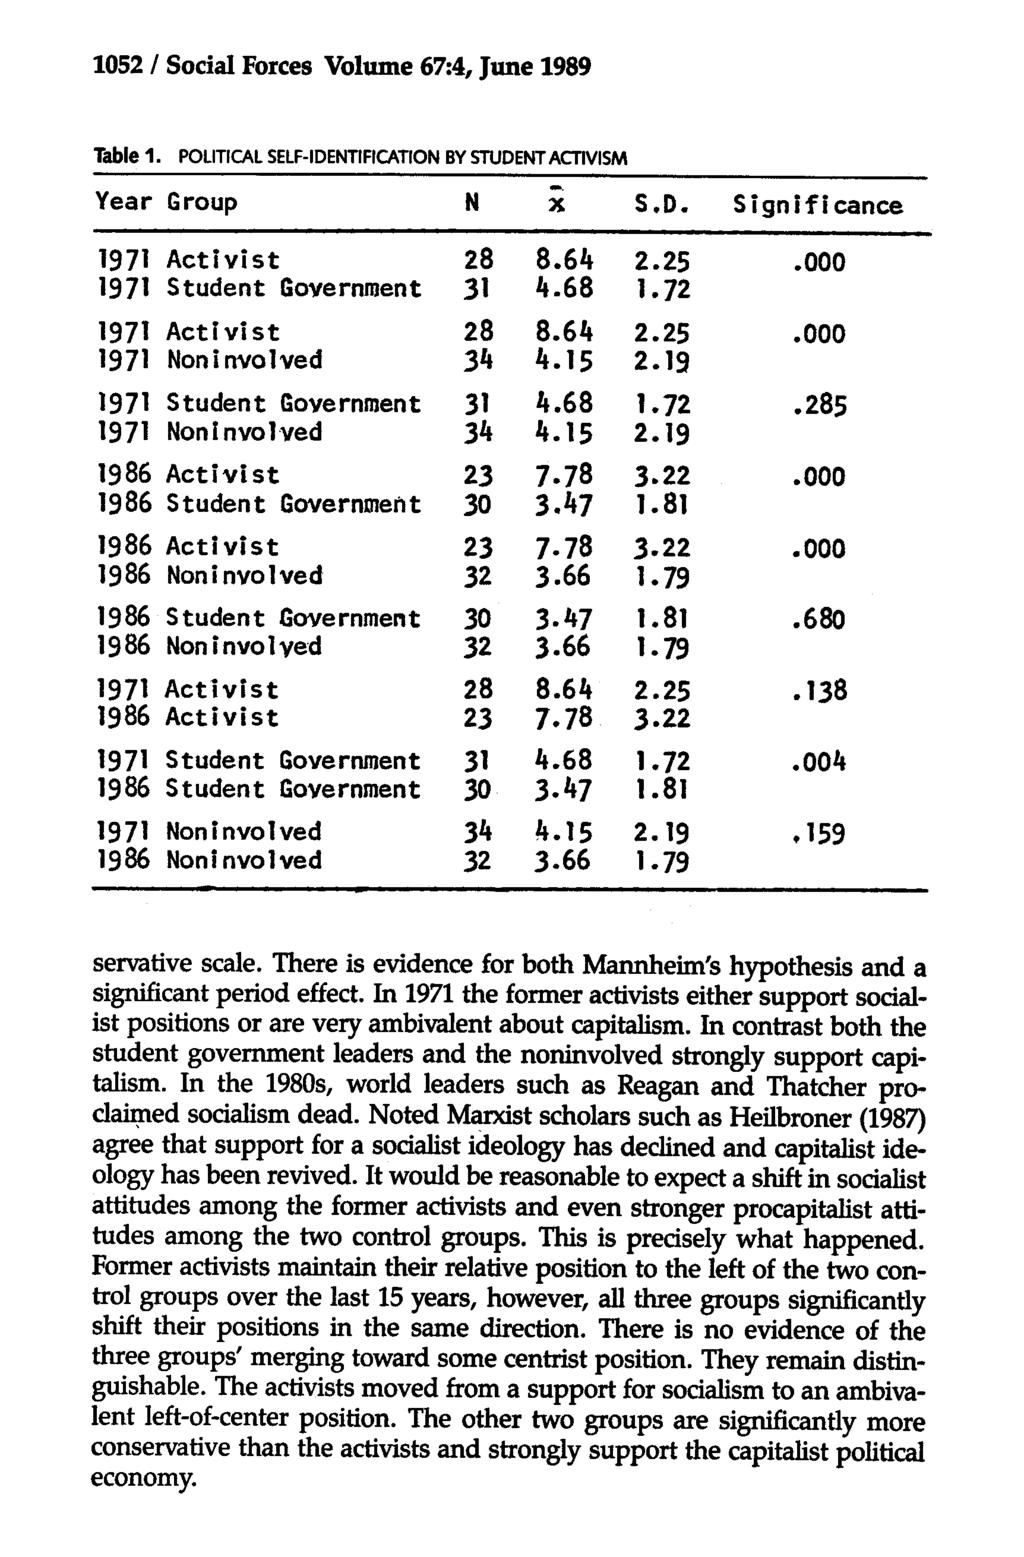 1052 / Social Forces Volume 67:4, June 1989 Table 1. POLITICAL SELF-IDENTIFICATION BV STUDENTACTIVISM Year Group N x S.D. Significance 1971 1971 Activist Student Government 28 31 8.64 4.68 2.25.000 1.